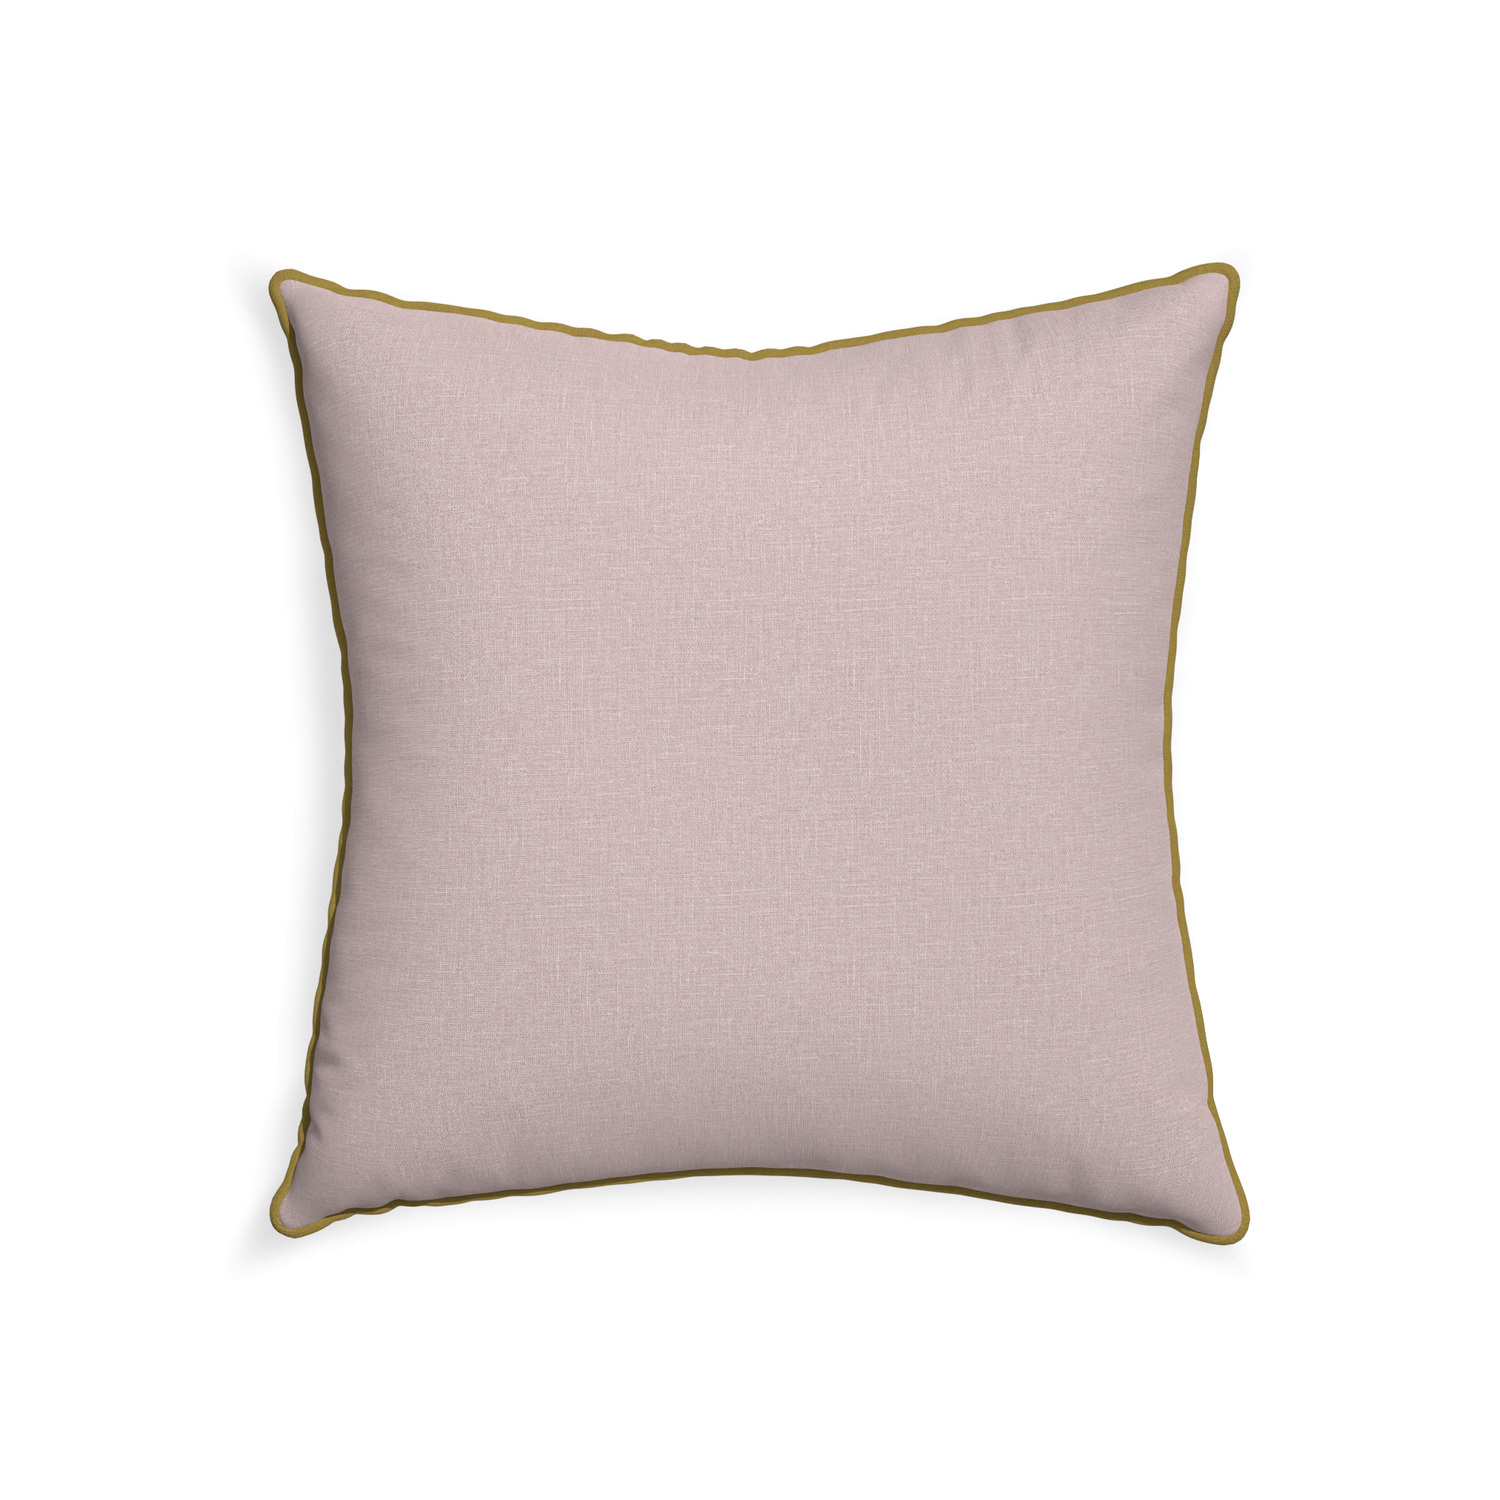 22-square orchid custom mauve pinkpillow with c piping on white background